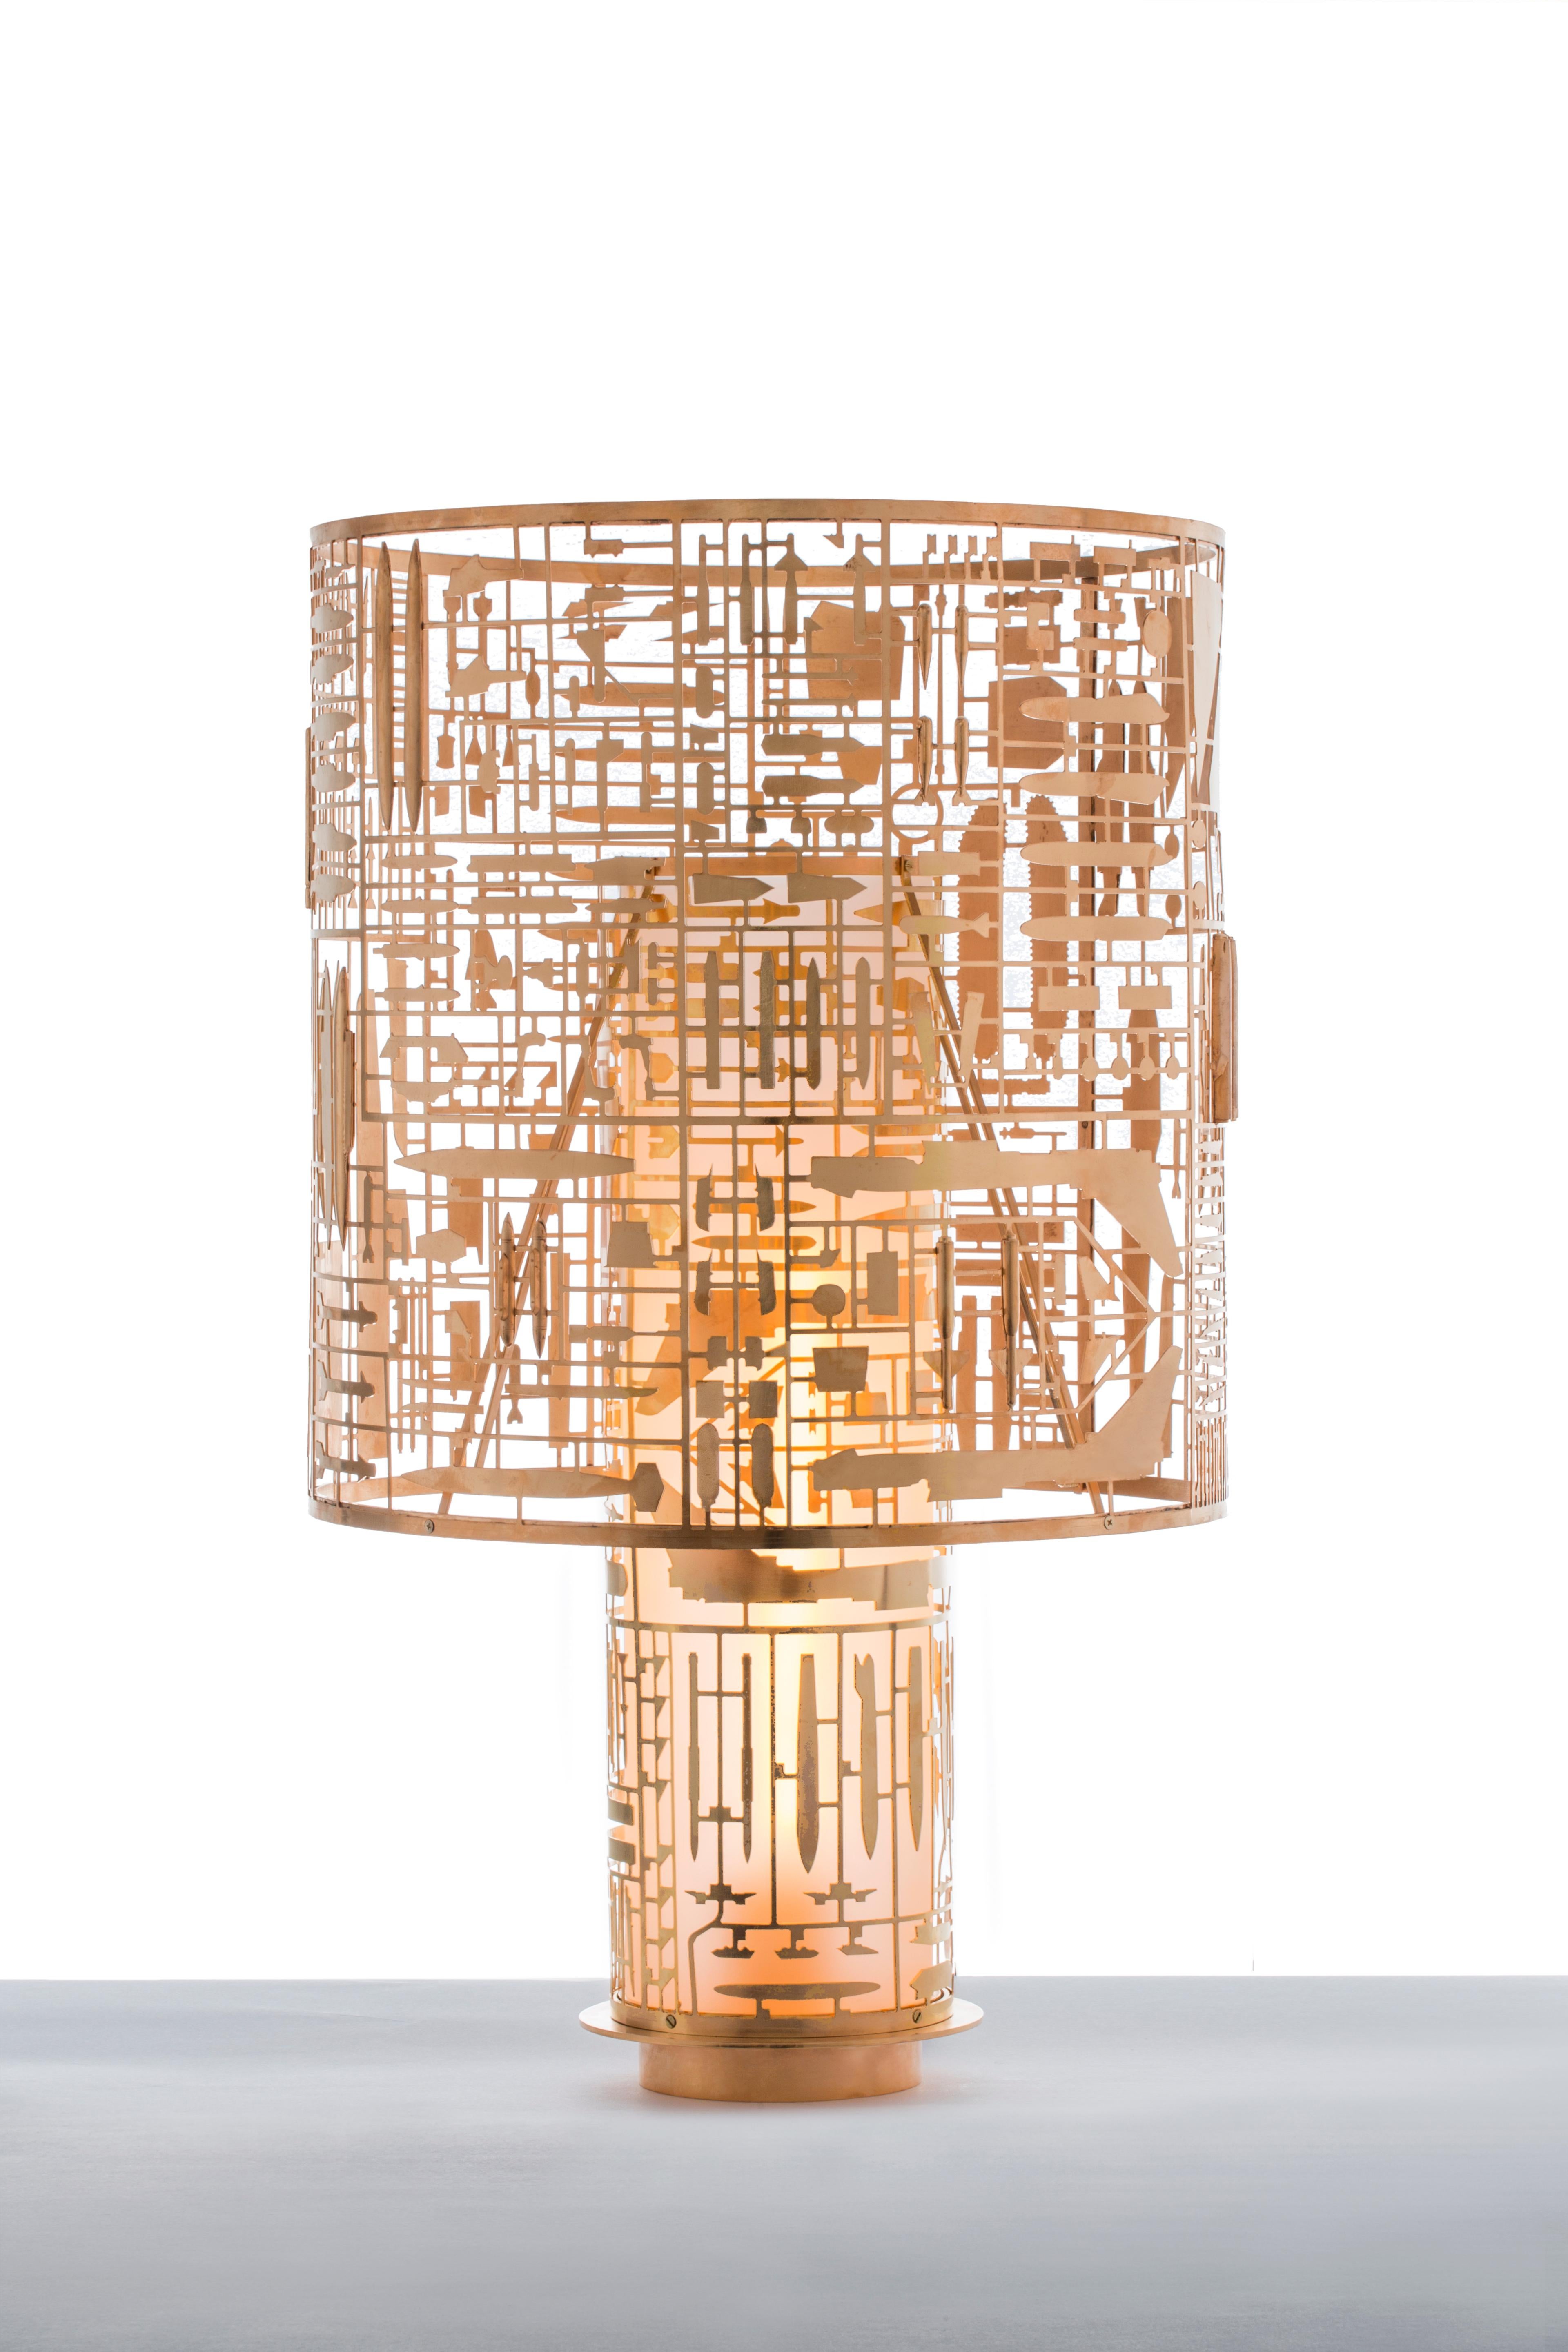 Disarmante Table Lamp by Secondome Edizioni
Limited Edition Of 30 pieces + 3 A.P.
Designer: Gio Tirotto.
Dimensions: Ø 49 x H 65 cm.
Materials: Glass and brass.
Collection / Production: Secondome. 

DISARMANTE (Disarming) is the table lamp by GIO